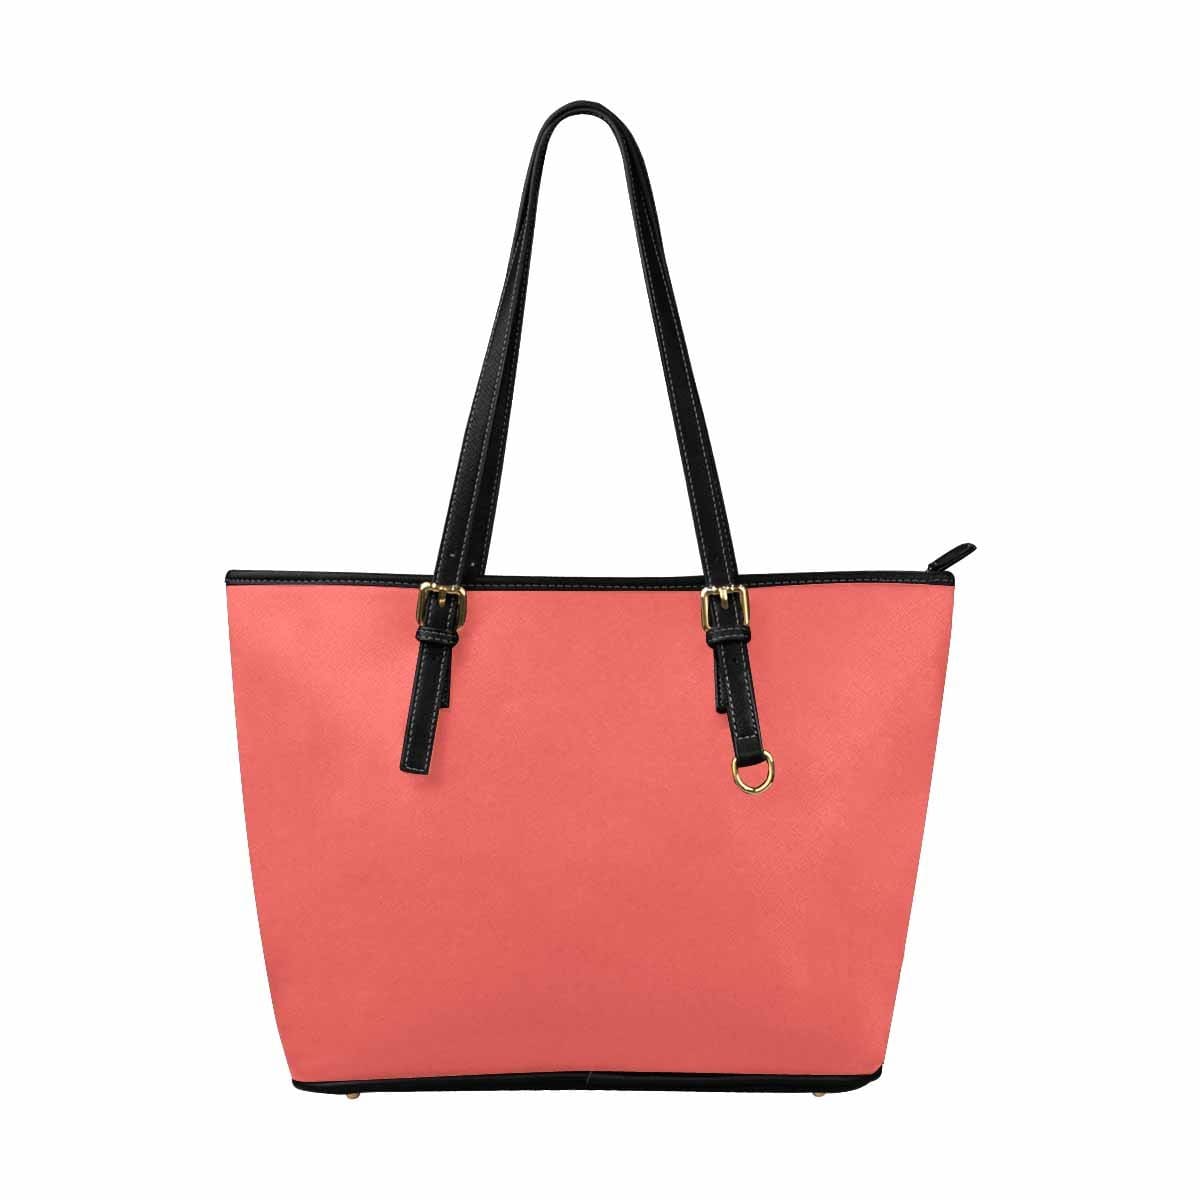 Large Leather Tote Shoulder Bag - Pastel Red - Bags | Leather Tote Bags